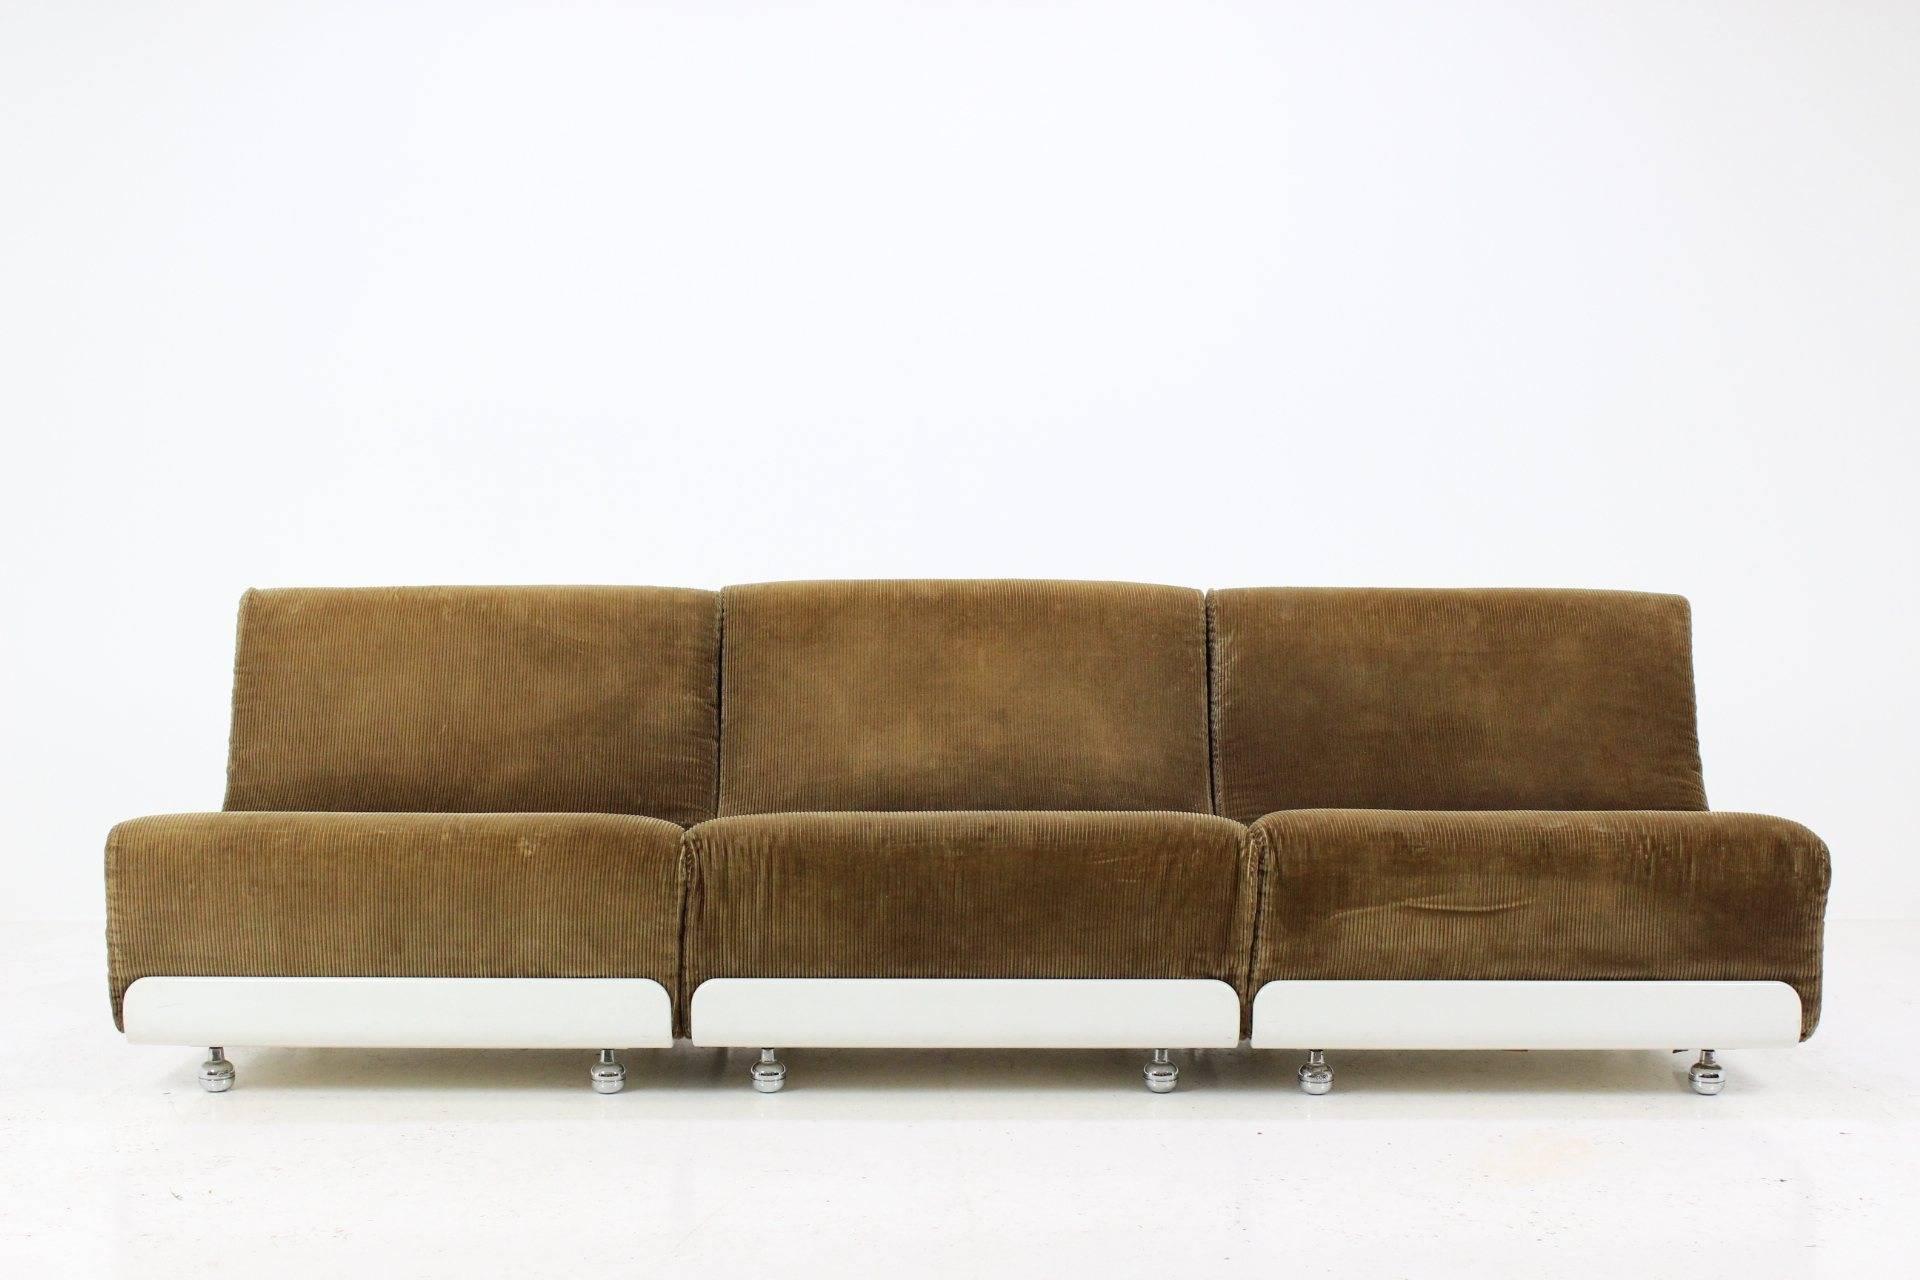 This set of three vintage sofa units was designed by Luigi Colani, and manufactured in Germany by COR. Each unit features a white base with metal wheels, and brown fabric upholstery seat and backrest. The units can be used individually or put